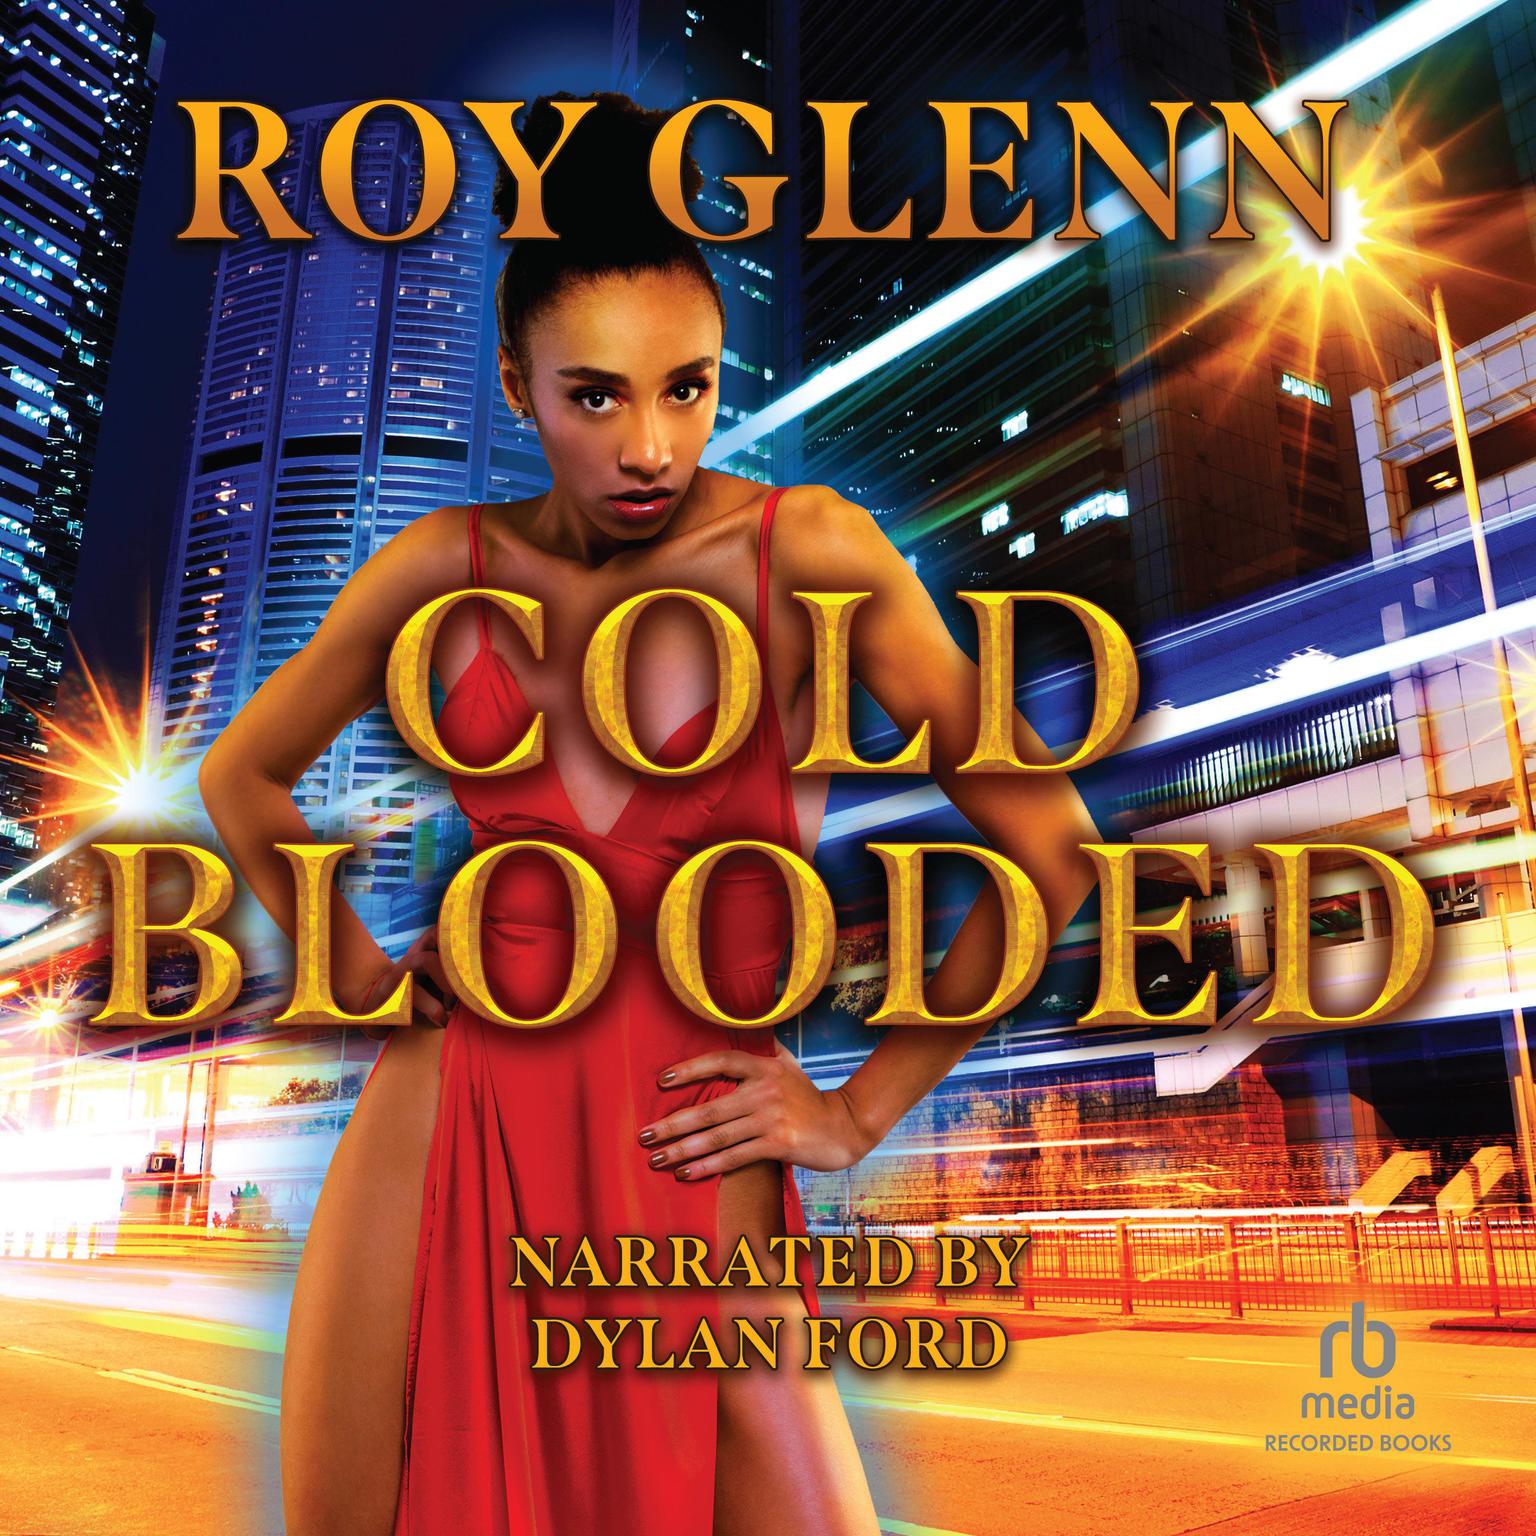 Cold Blooded Audiobook, by Roy Glenn